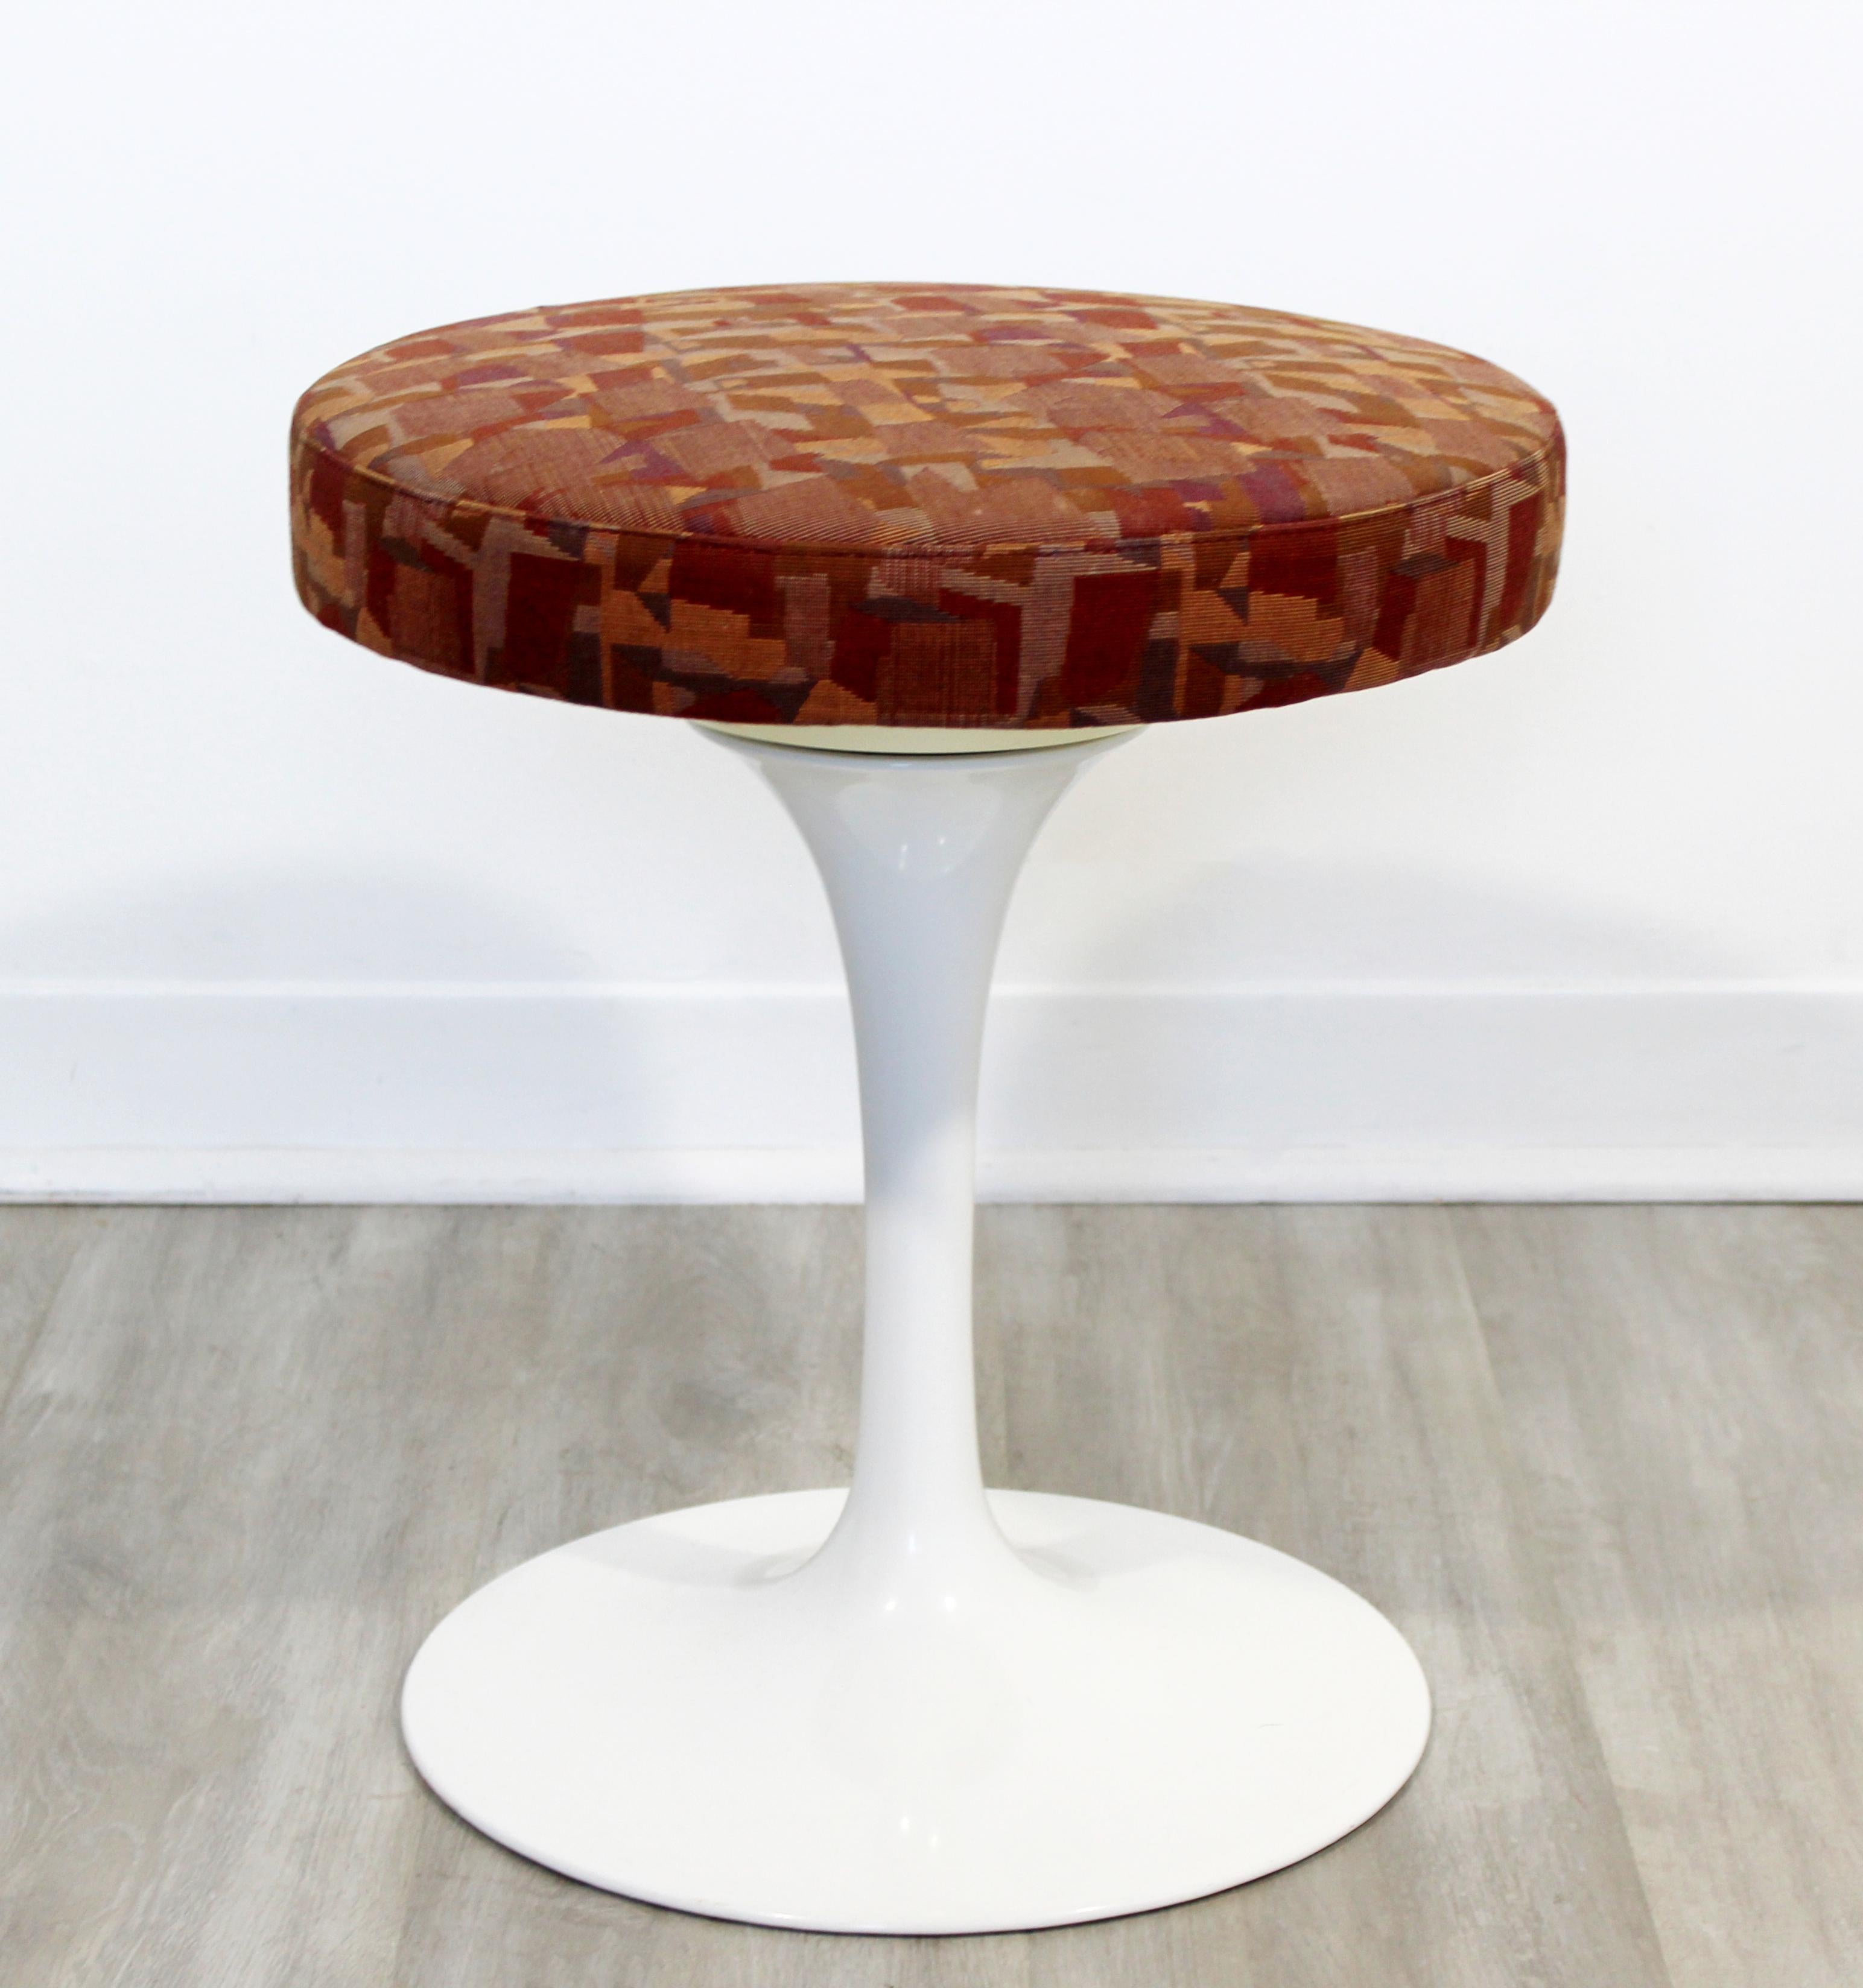 For your consideration is a sweet vanity stool, with a 